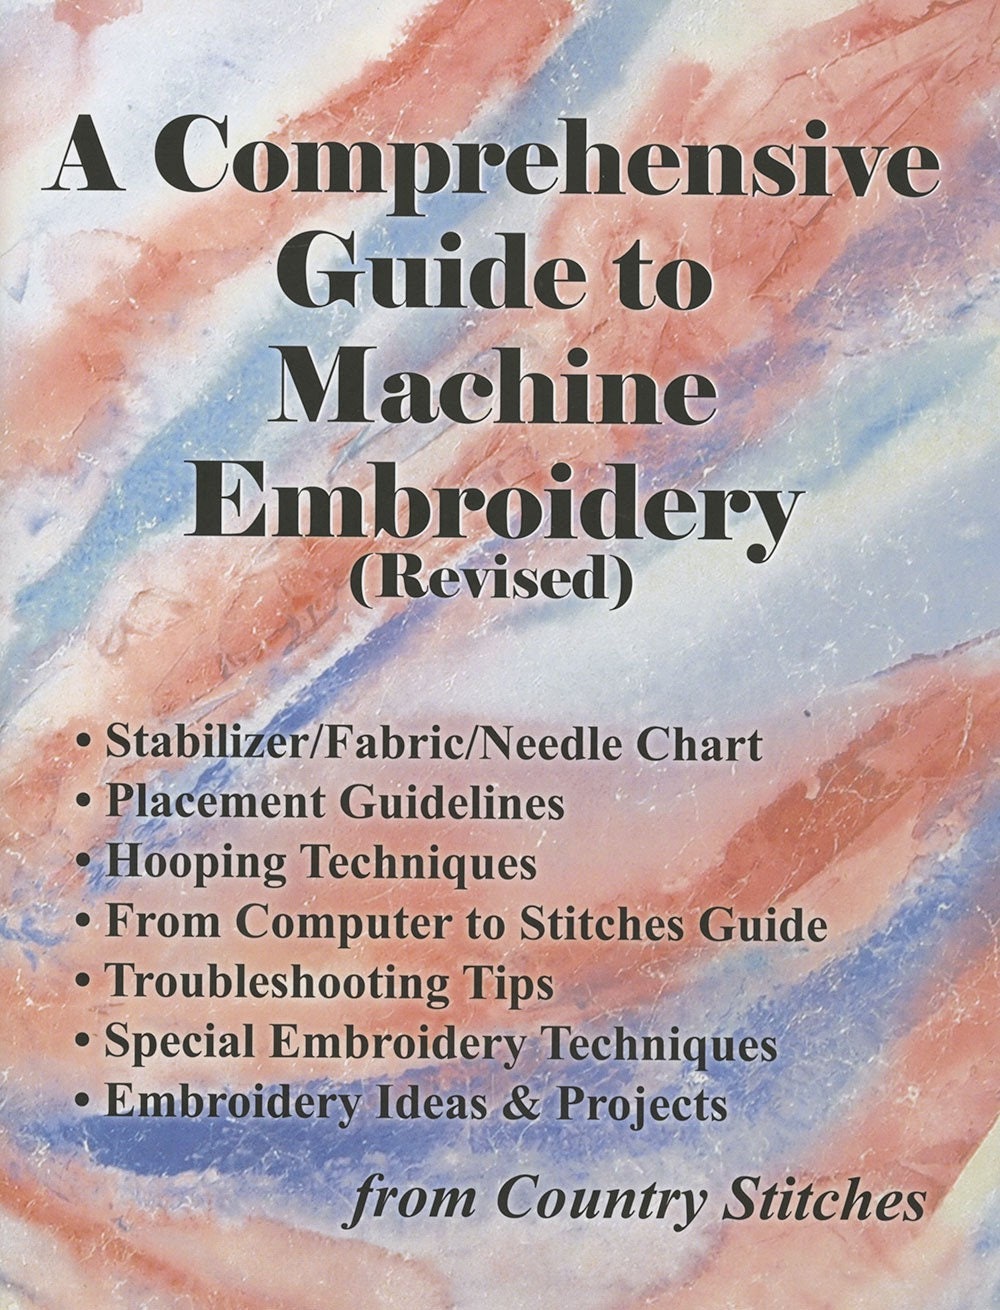 A Comprehensive Guide To Machine Embroidery 2015 Revised Edition by Anita Covert PhD and Deborah Lathrop VanAken for Country Stitches